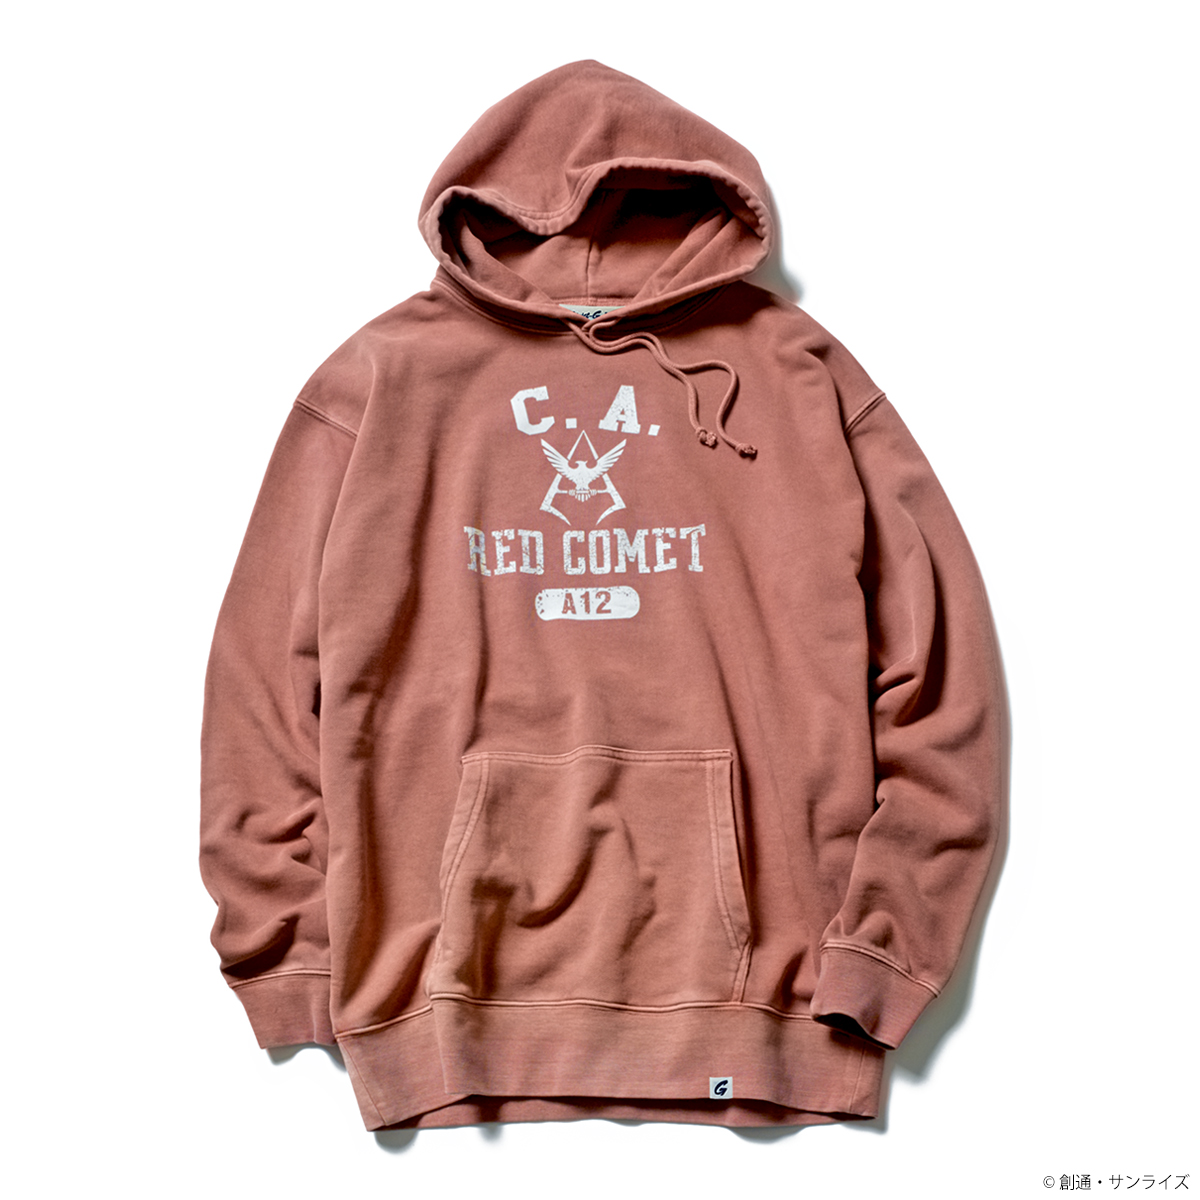 STRICT-G.Fab Mobile Suit Gundam hoodie RED COMET